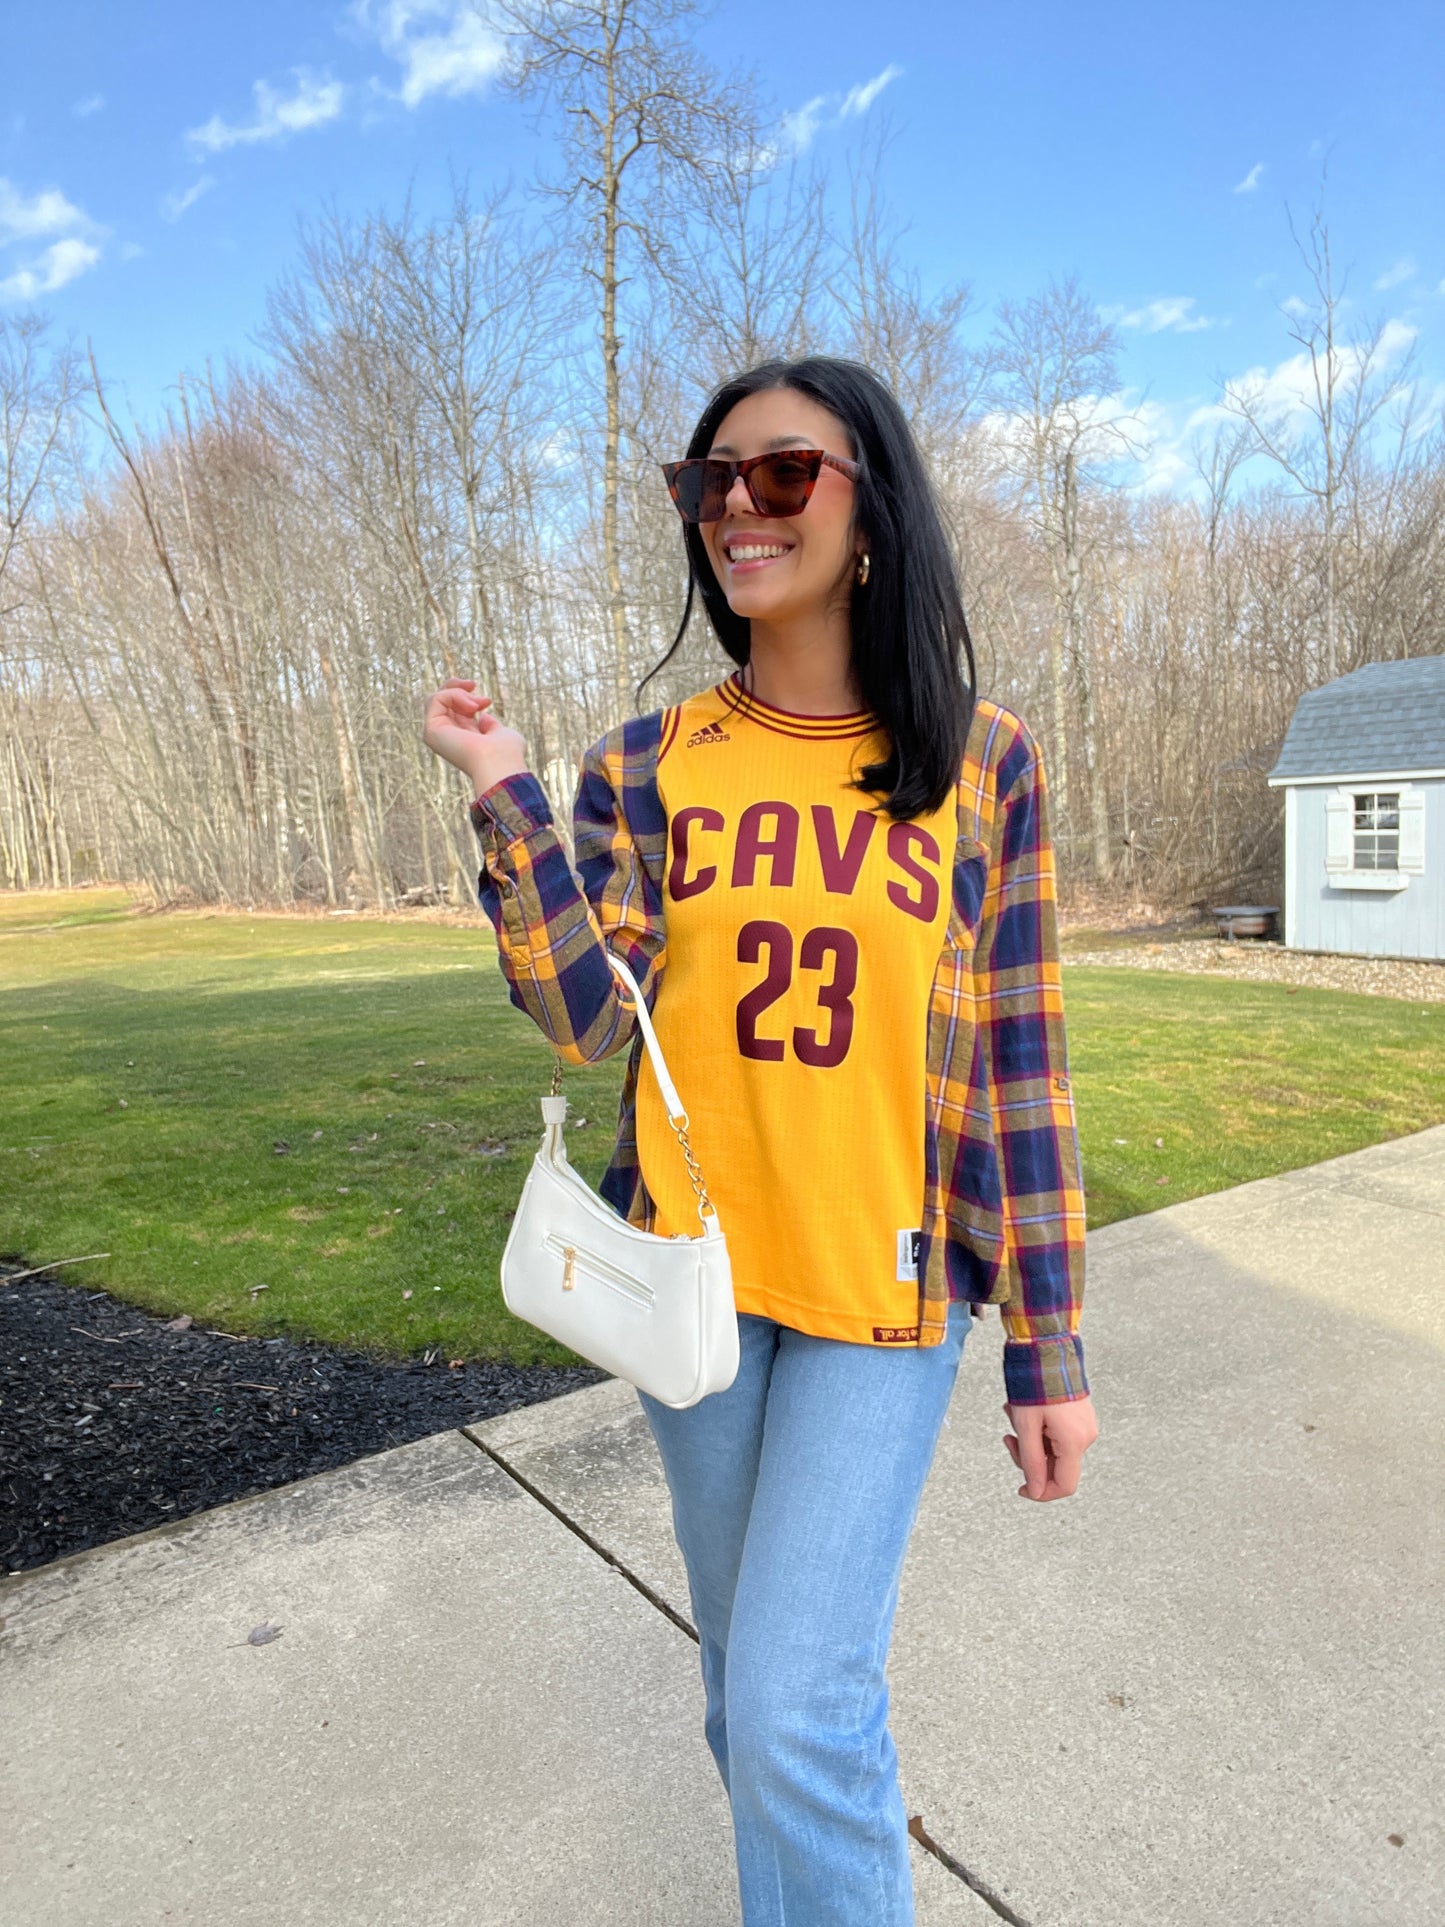 23 YELLOW JAMES CAVS JERSEY X FLANNEL